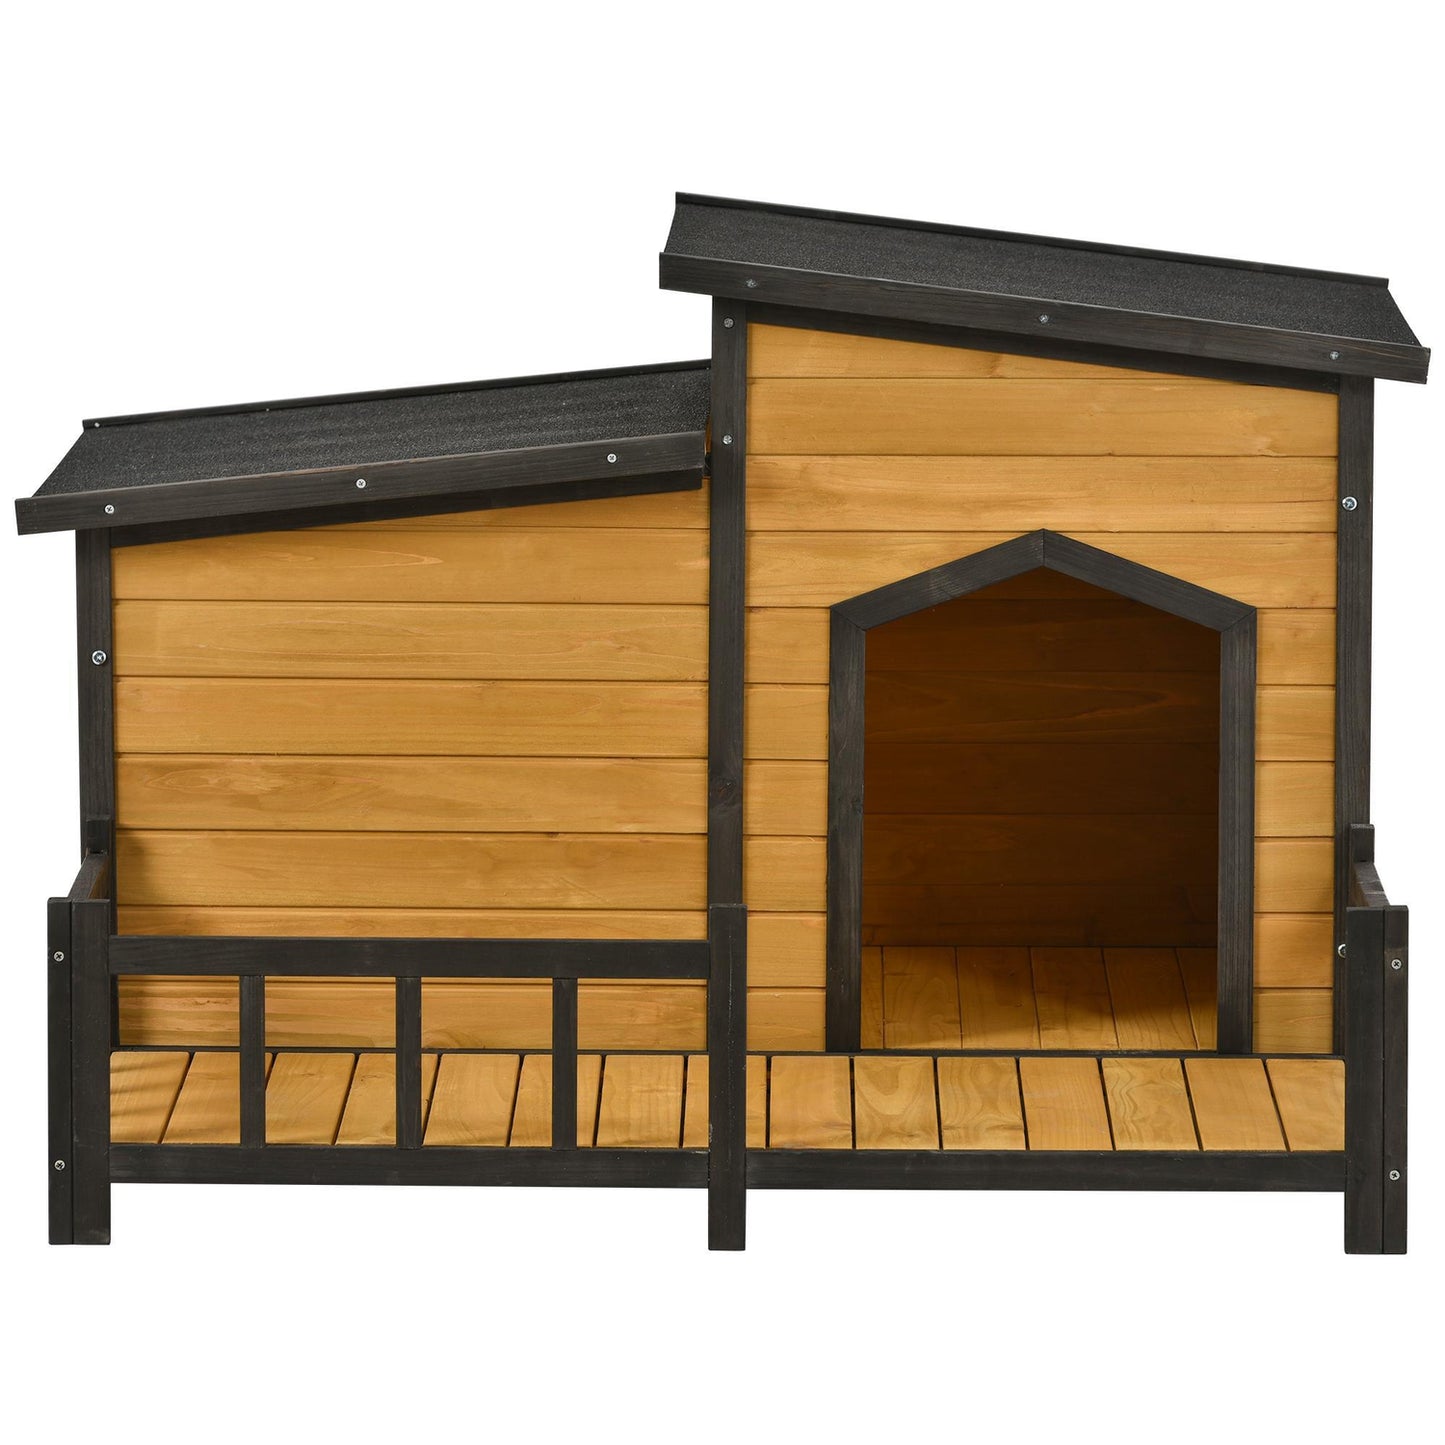 Baytocare 47.2" Large Wooden Dog House Outdoor, Indoor Dog Crate, Cabin Style, with Porch